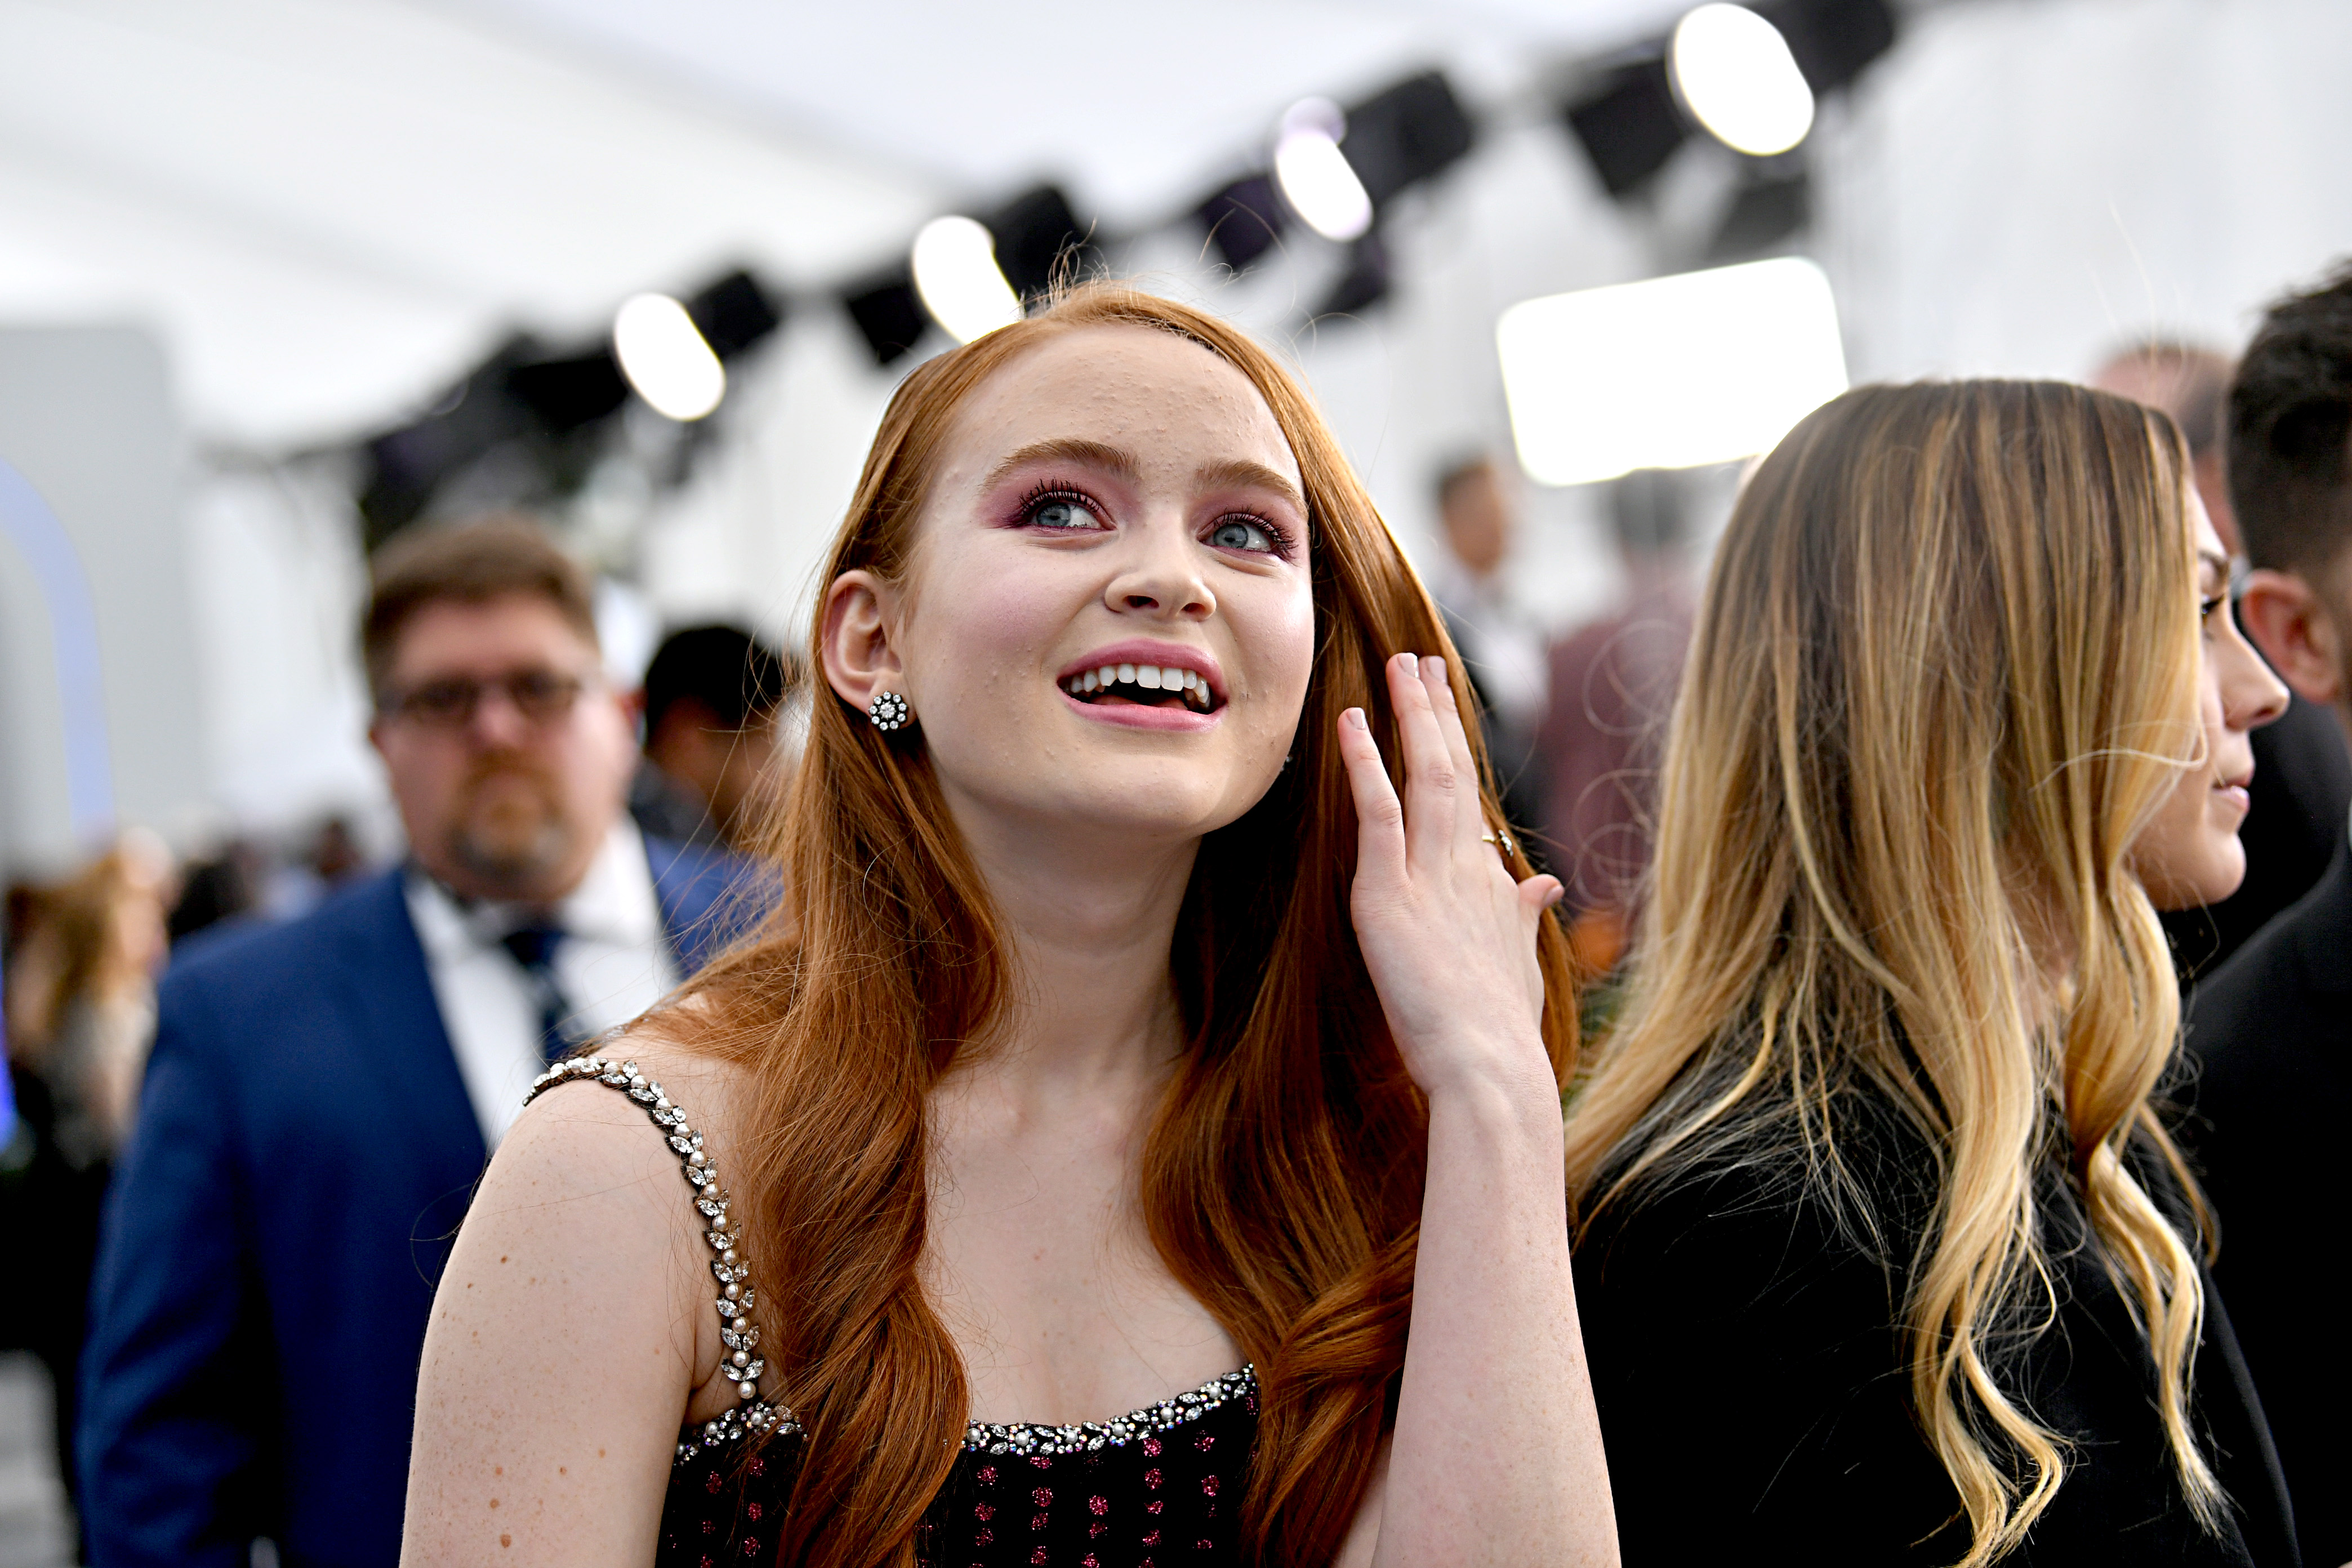 Sadie Sink attends the 26th Annual Screen Actors Guild Awards